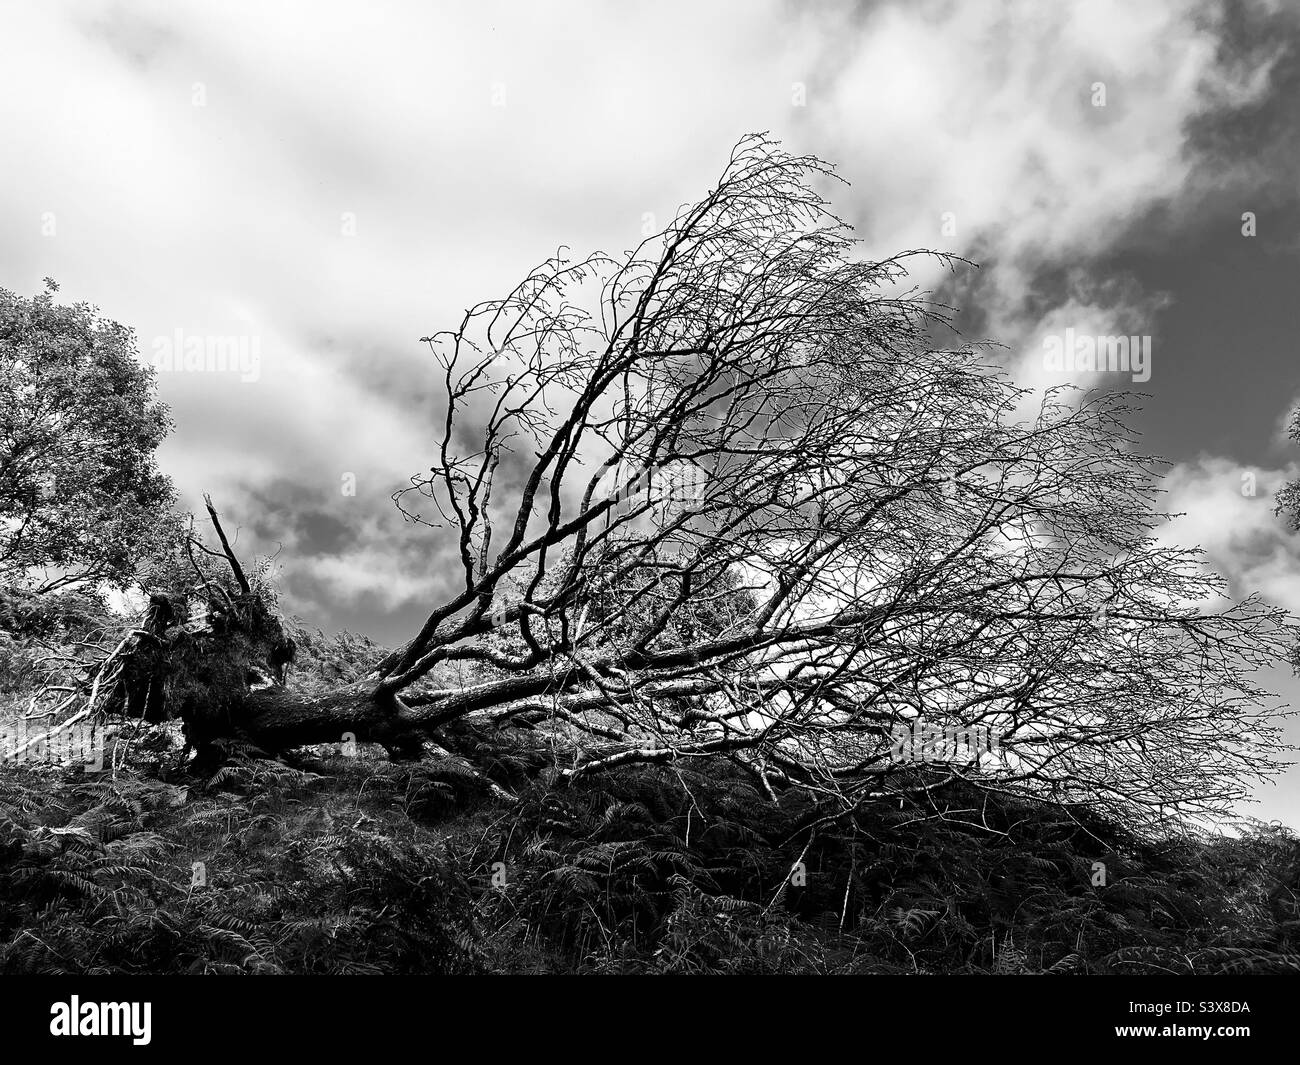 Fallen tree in black and white Stock Photo